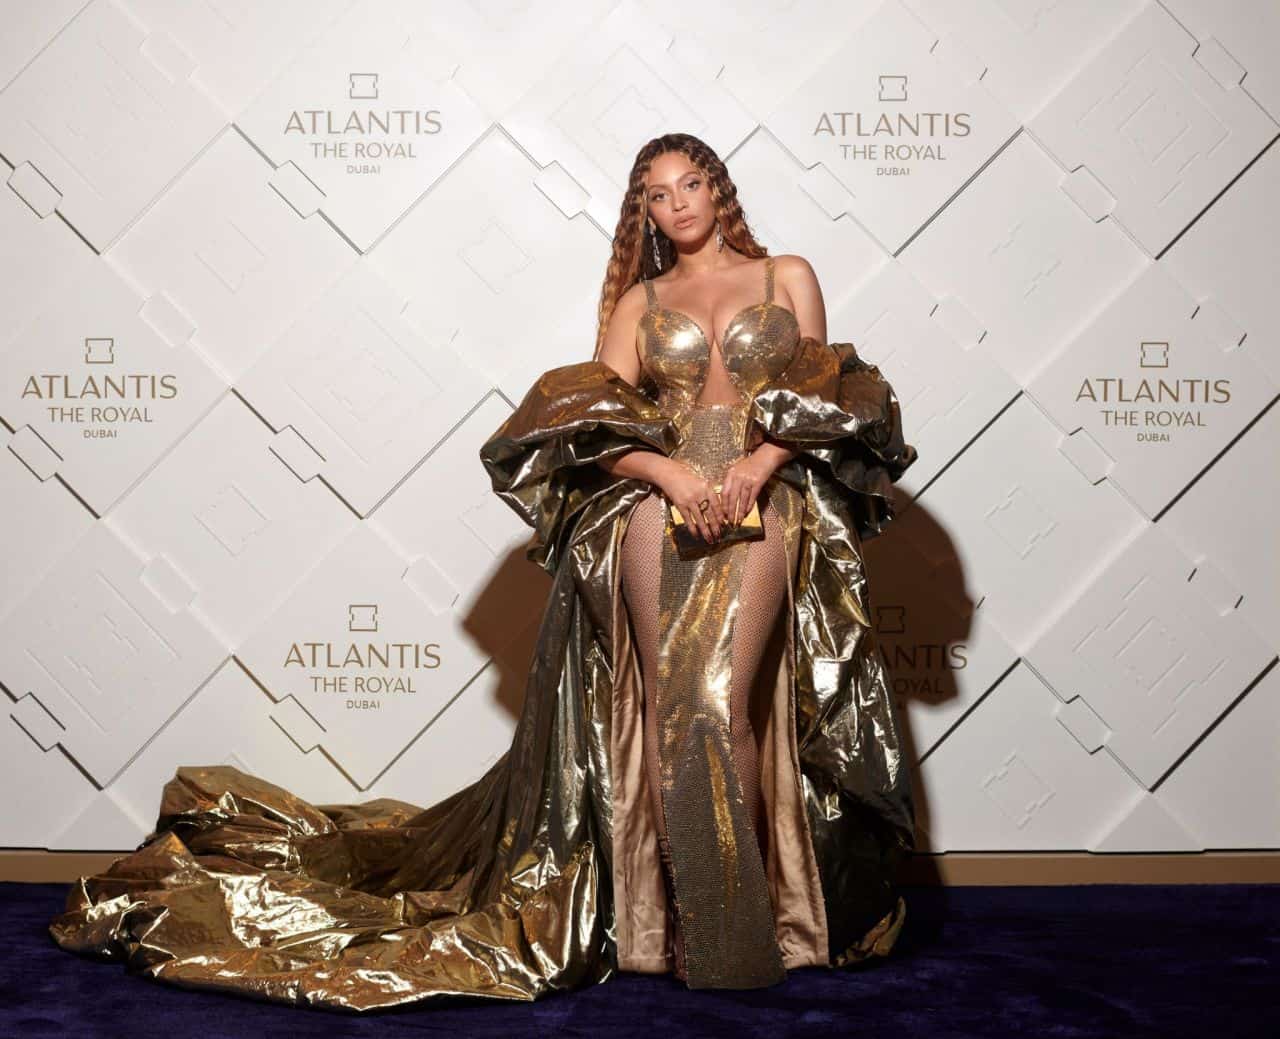 Beyonce Shines in Gold Gown at Dubai's Atlantis The Royal Hotel Opening